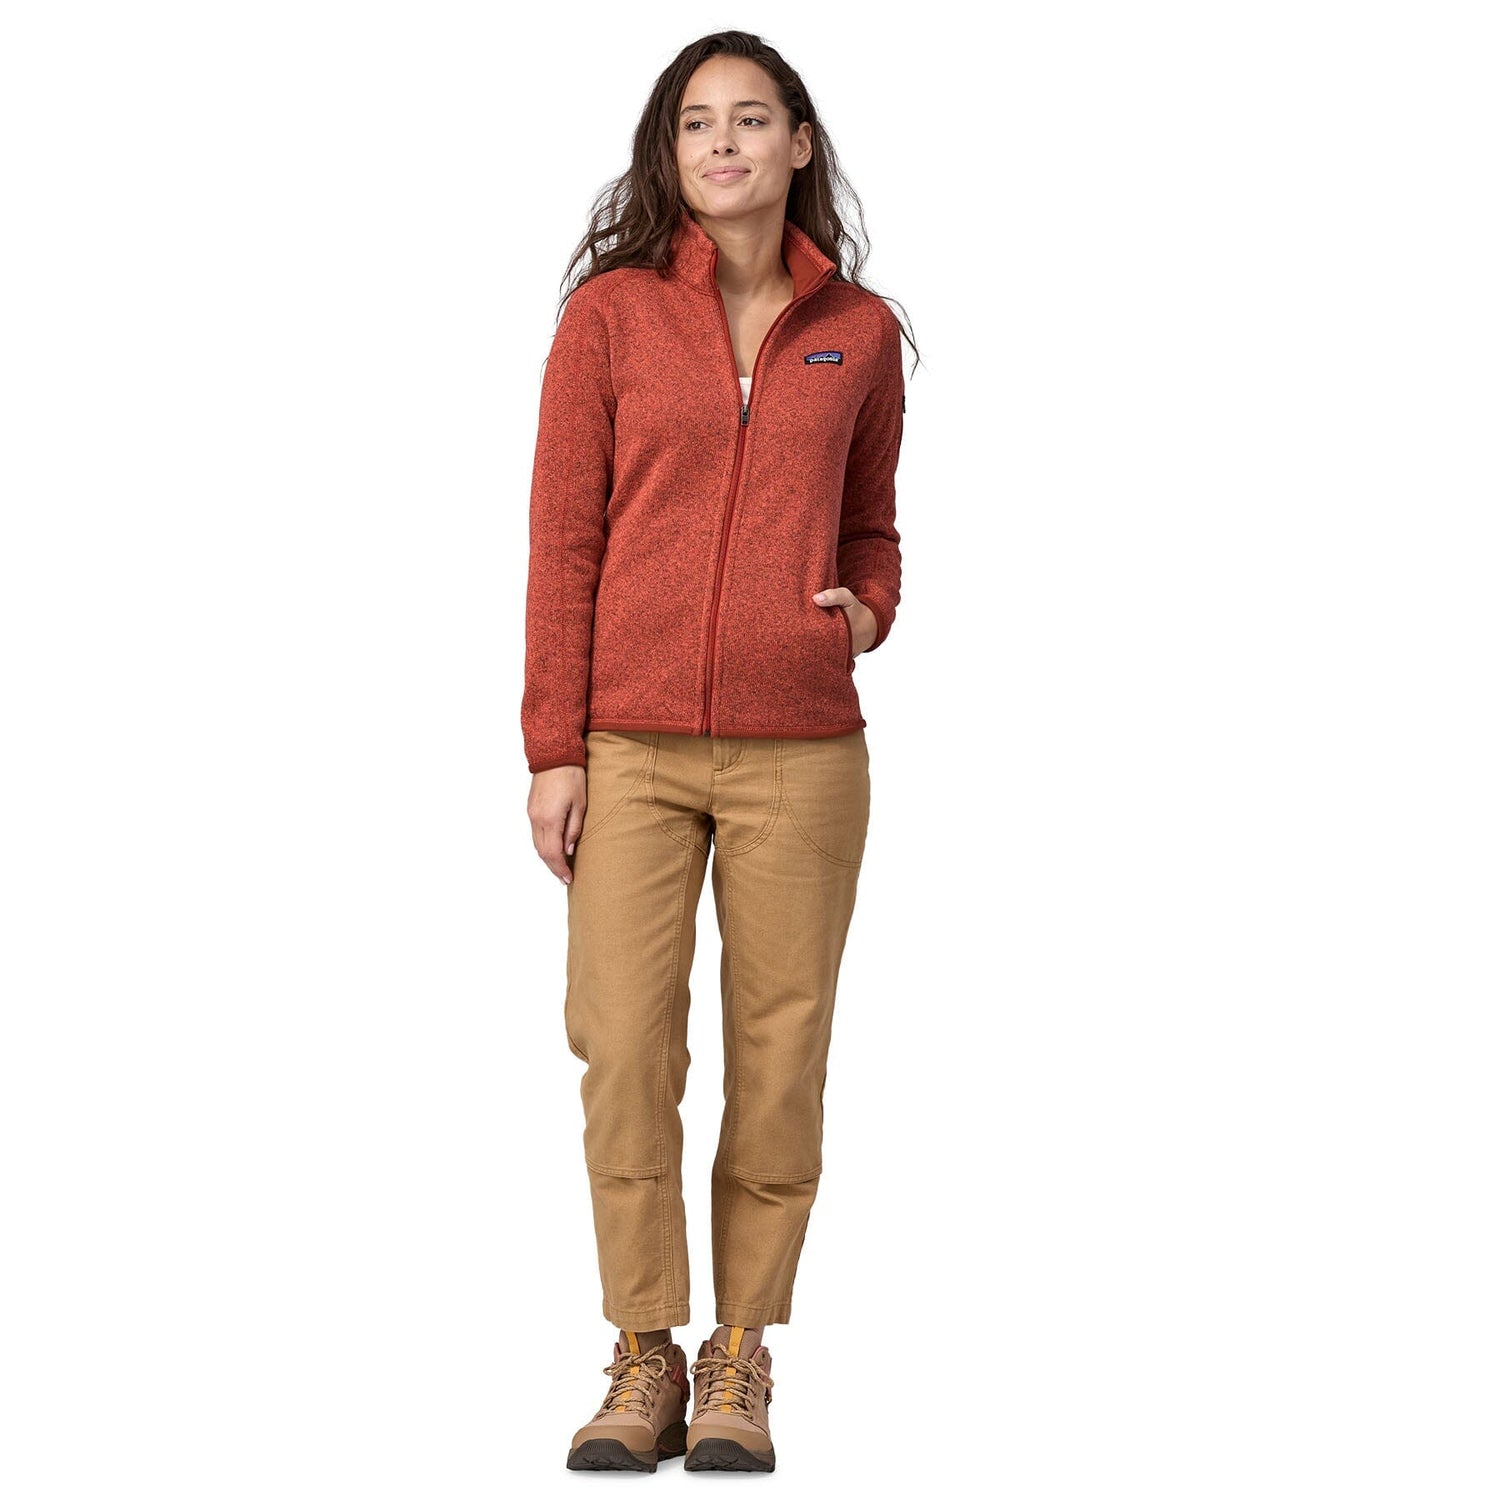 Patagonia Women's Better Sweater Fleece Jacket - Recycled